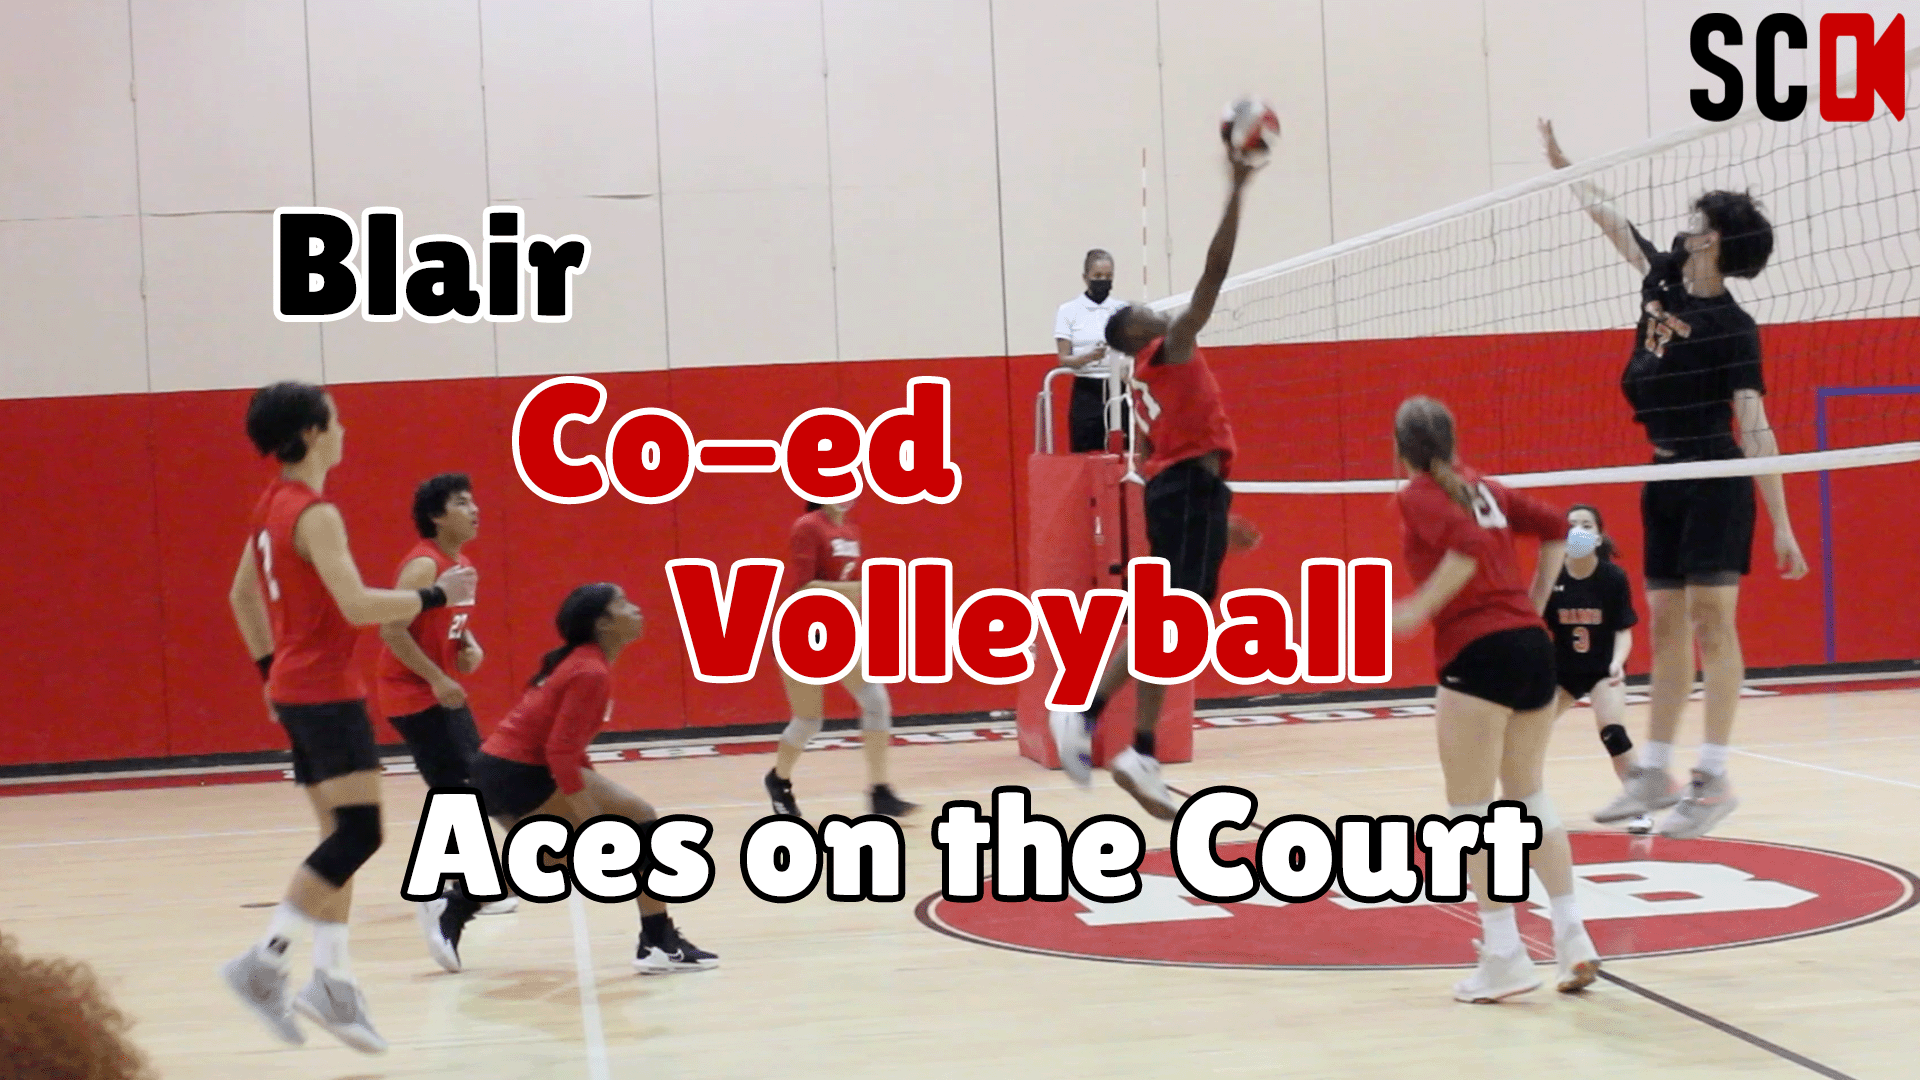 Blair Co-ed Volleyball Aces on the Court